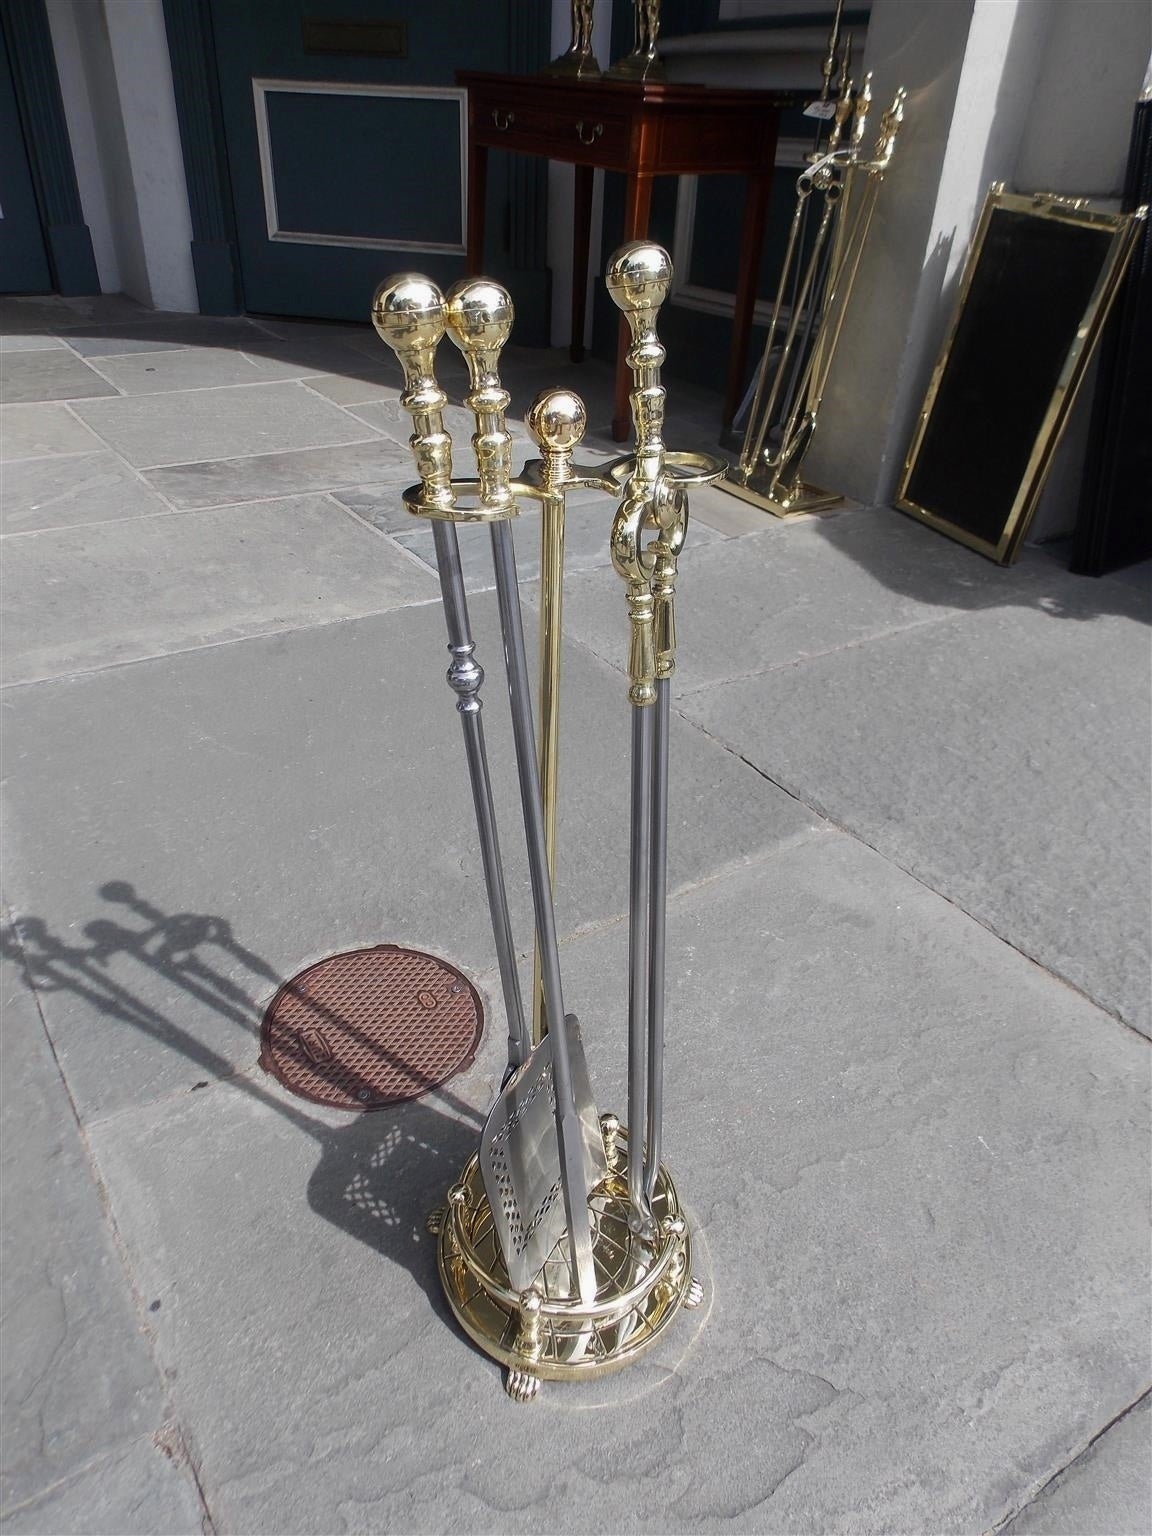 Set of American brass ball top and polished steel fire tools resting on decorative circular stand with gallery and lions paw feet. Set consist of shovel, tong, and poker. Boston, Mid 19th Century